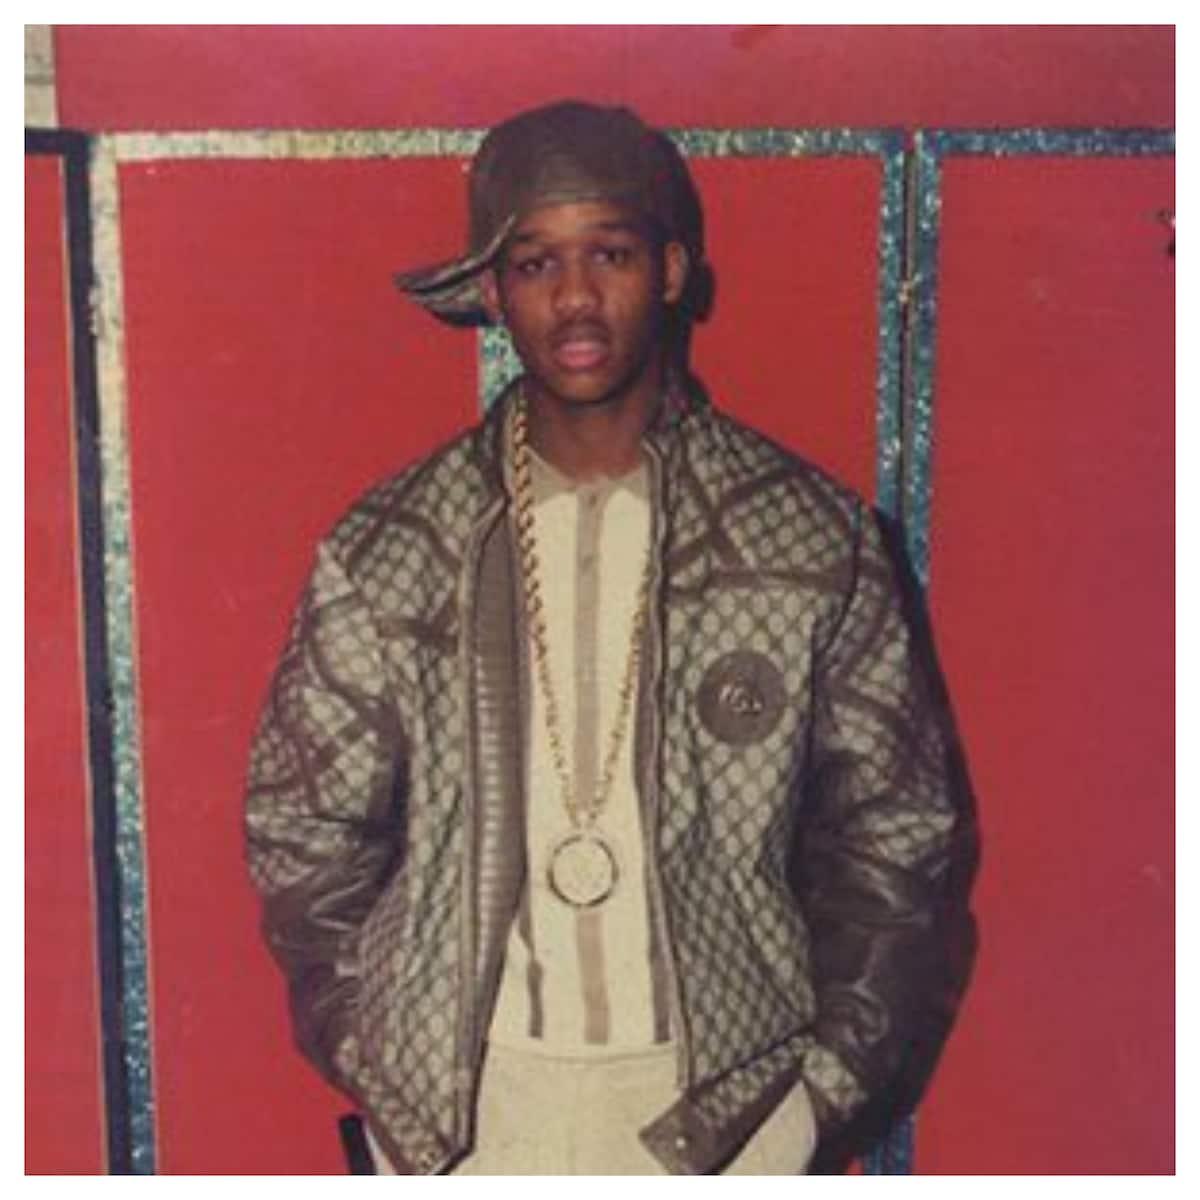 Alpo Martinez's net worth, children, wife, cause of death, charges,  profiles 